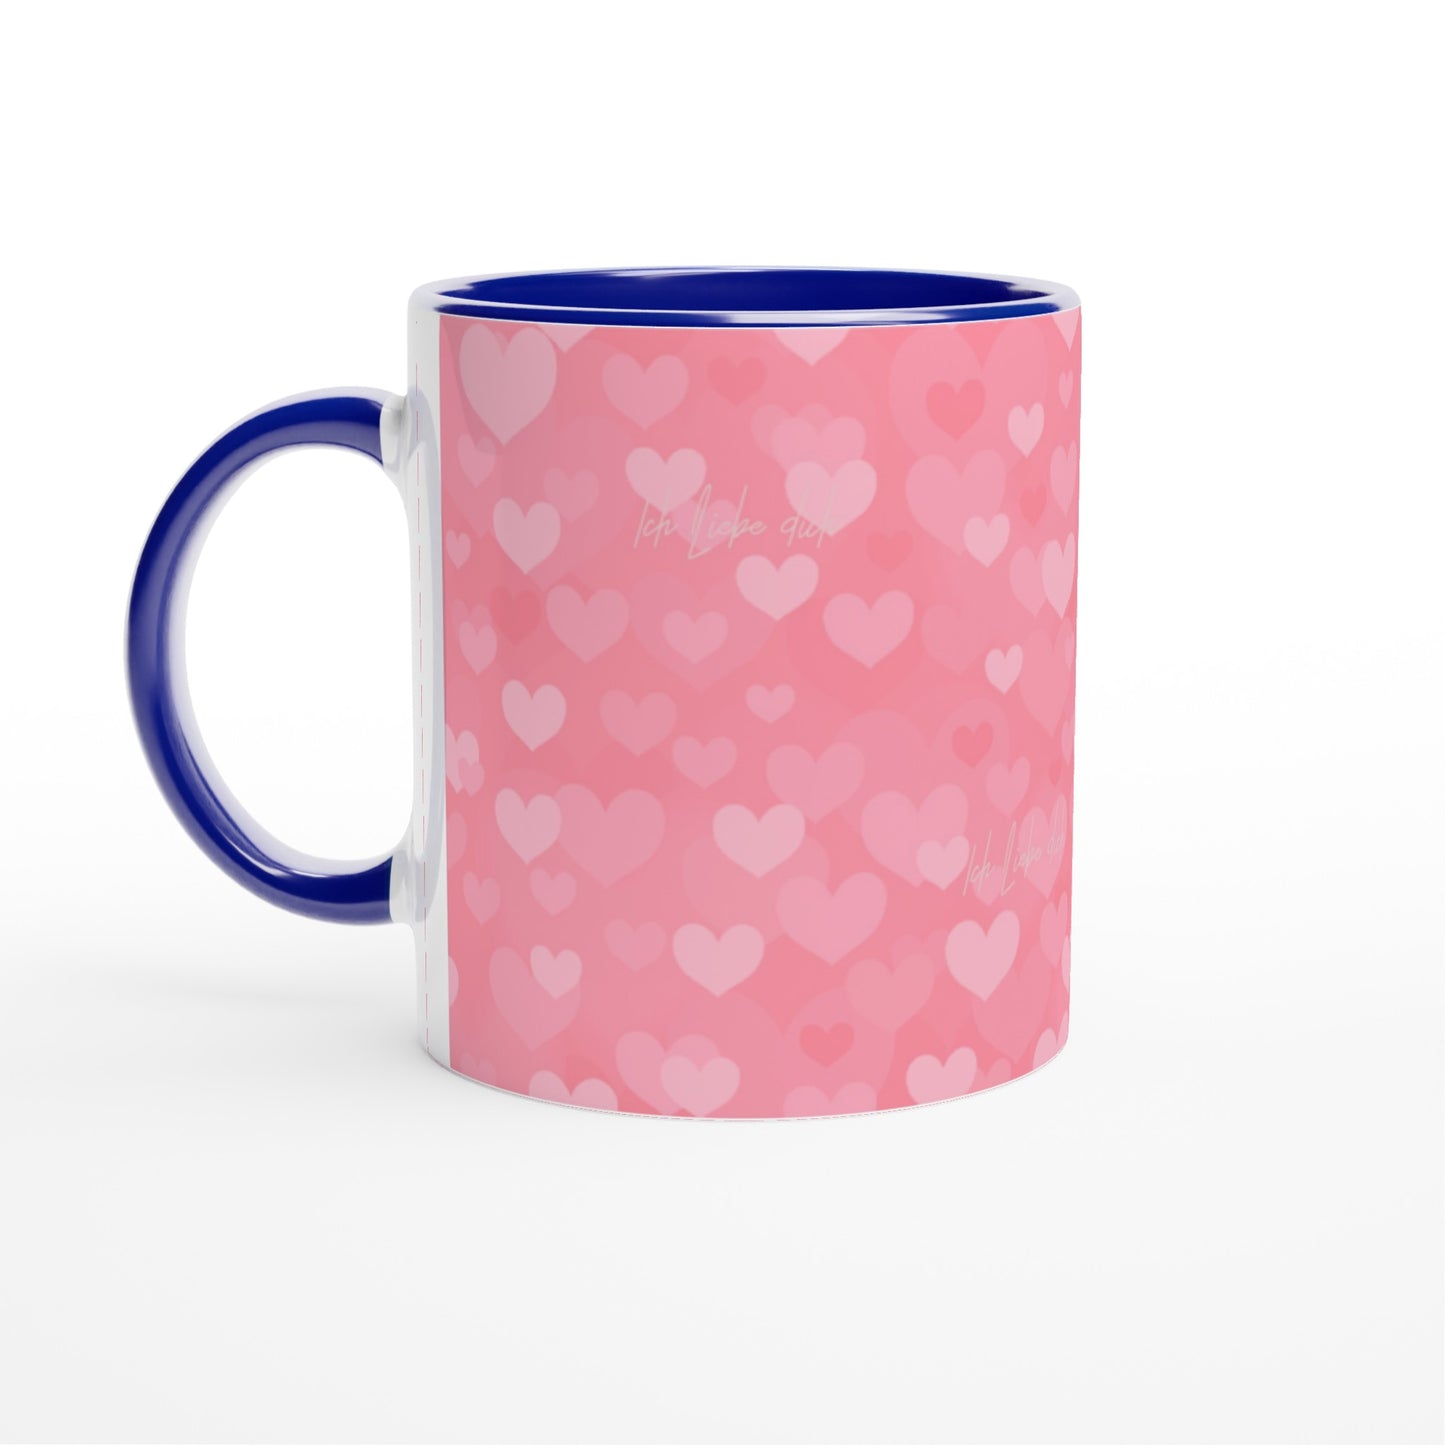 White 11oz Ceramic Mug with small lettering "Ich liebe dich"